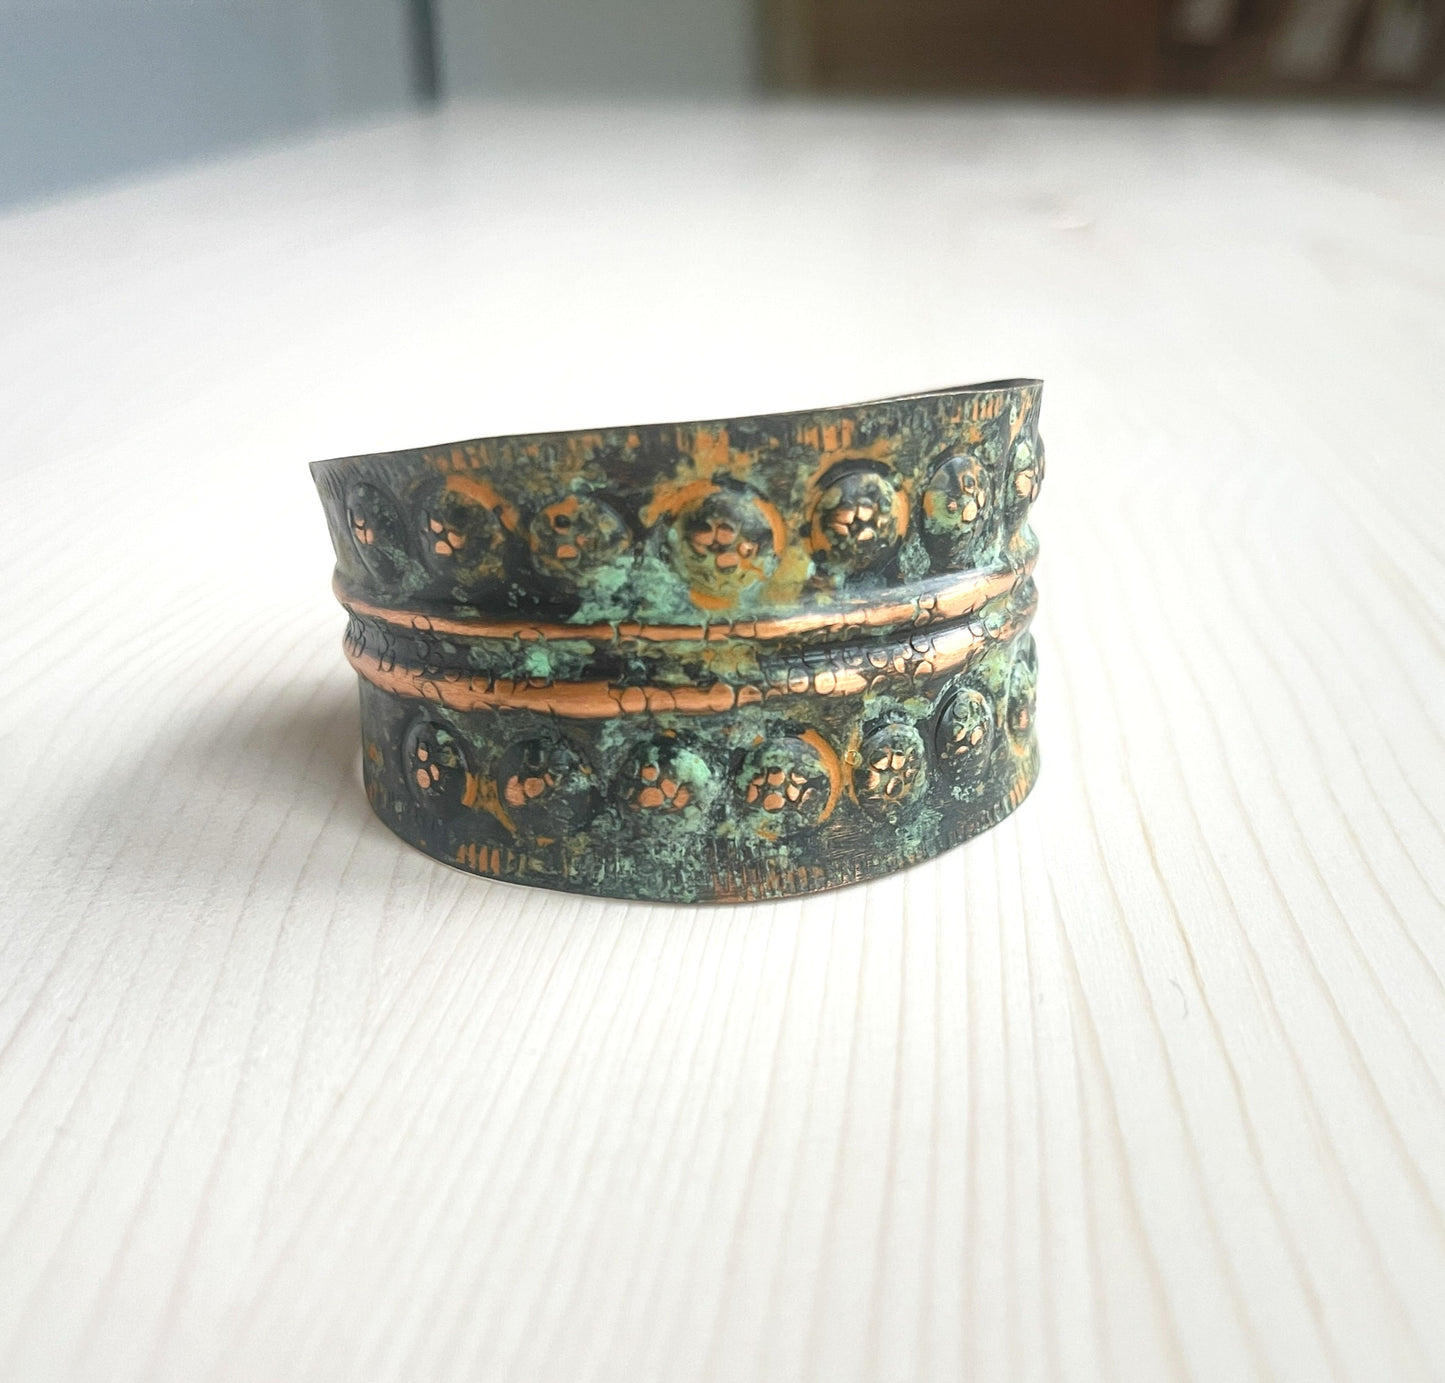 Handmade copper bracelet in a rich shades of green